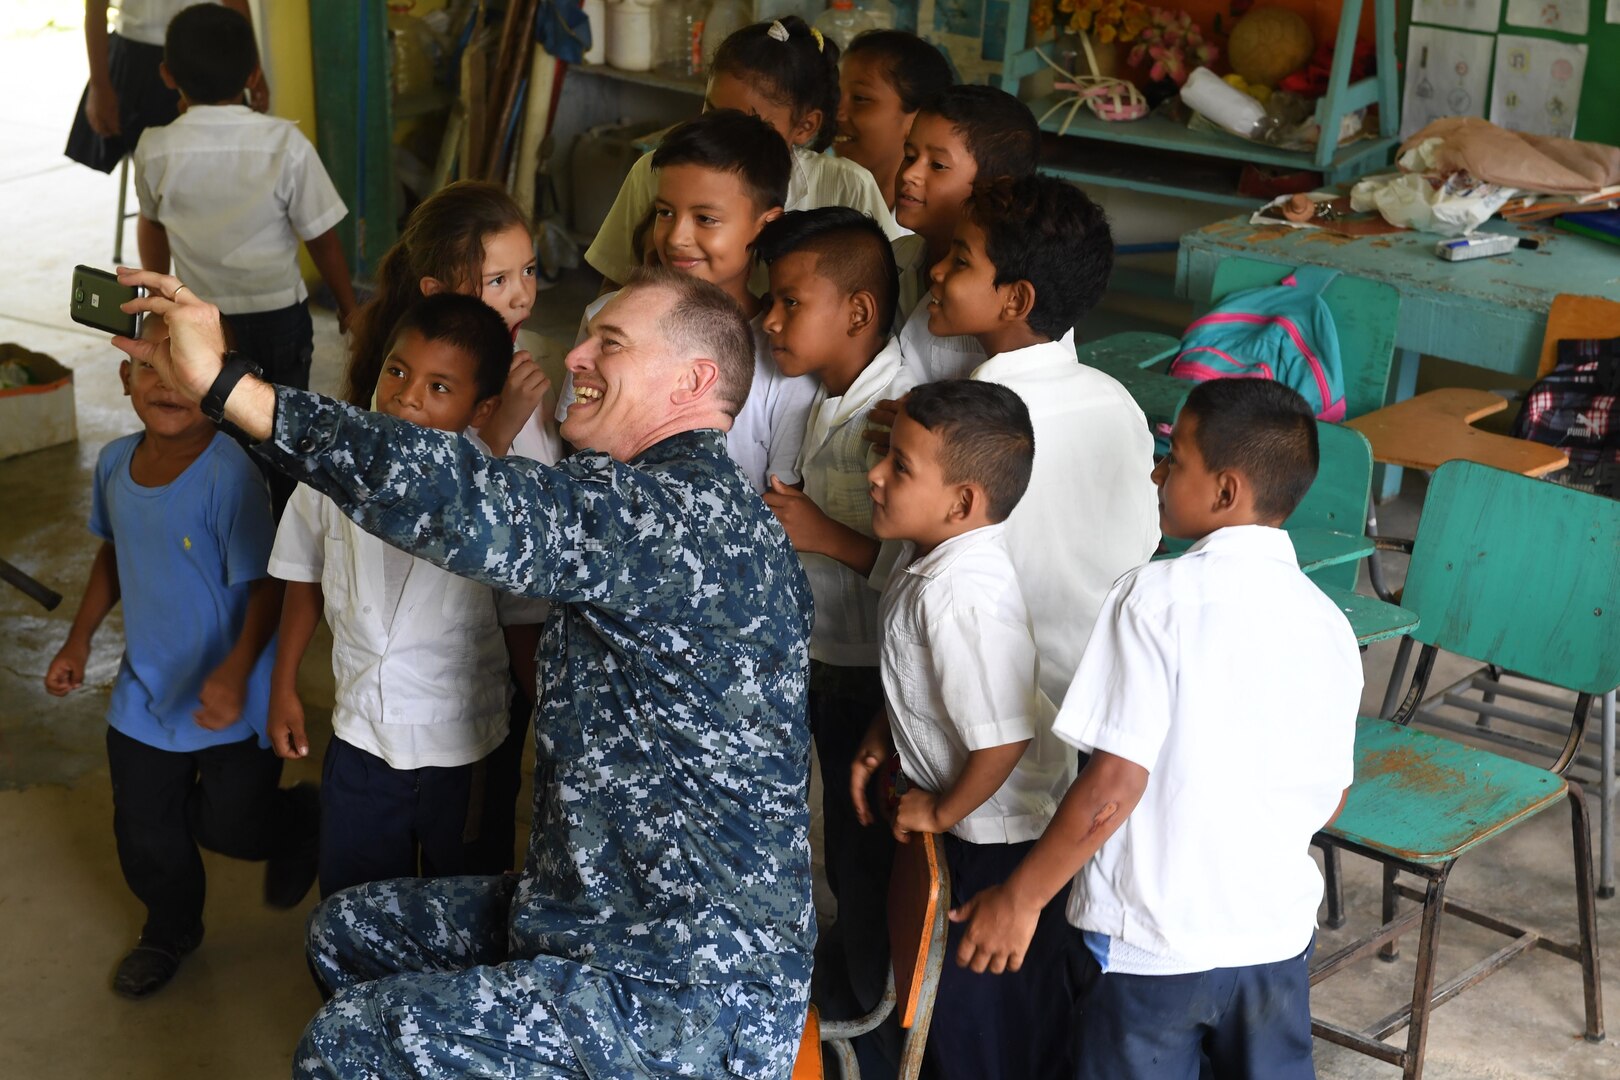 Navy Chaplain (Lt. Cmdr.) Clifford Rutledge takes a selfie with students at República de Colombia Elementary School in Silin, Honduras, Aug. 1, 2017. Sailors participated in a community relations project as part of Southern Partnership Station 2017, a U.S. Navy deployment focused on subject-matter-expert exchanges with partner-nation militaries and security forces in Central and South America. Navy photo by Petty Officer 1st Class Jeremy Starr